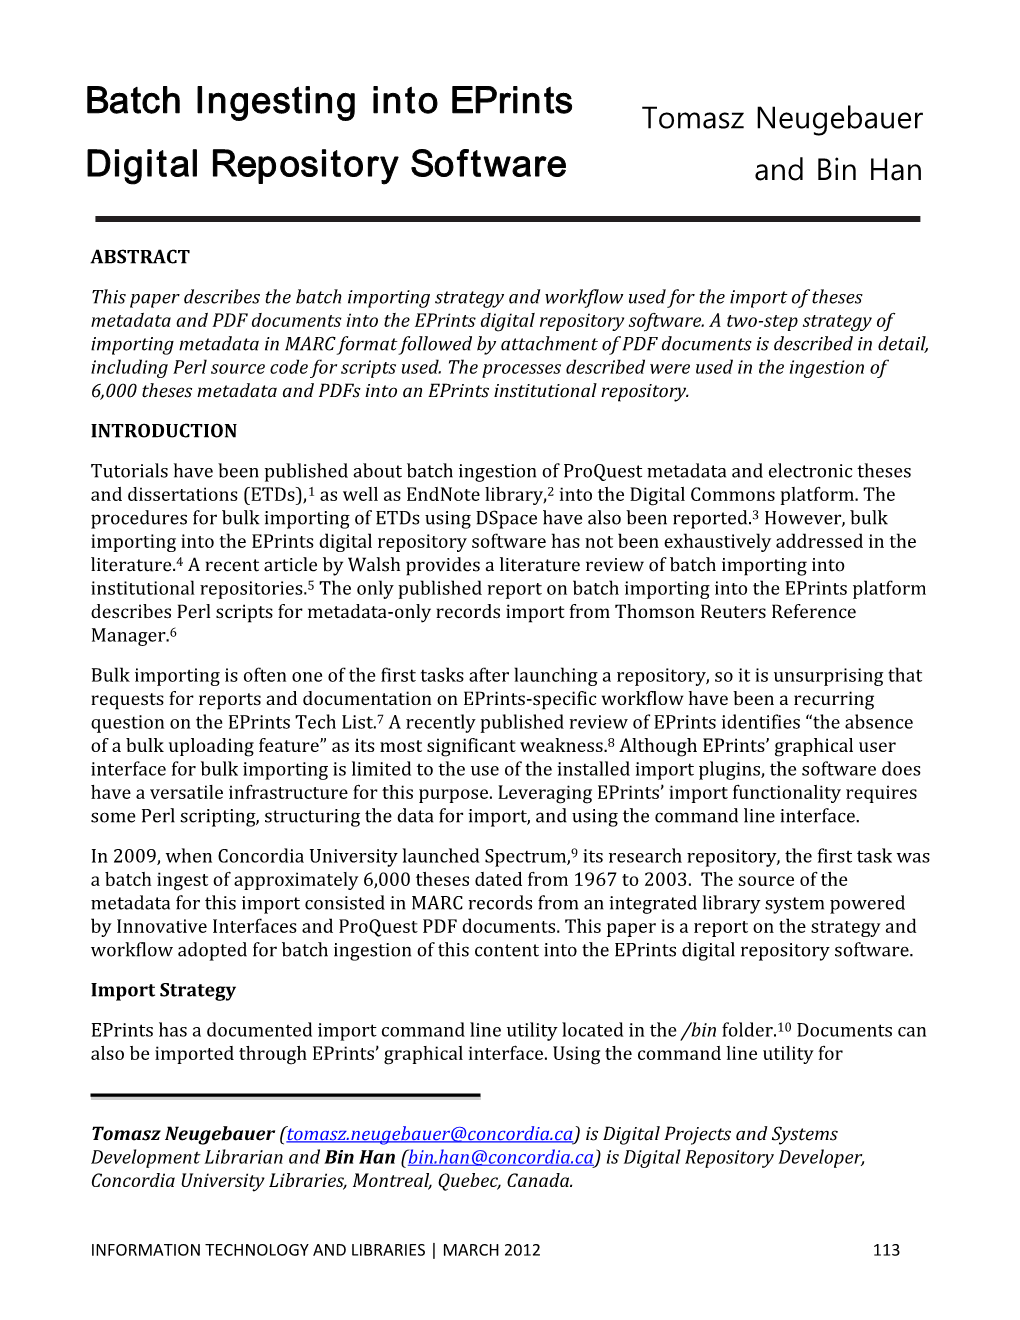 Batch Ingesting Into Eprints Digital Repository Software| Neugebauer and Han 114